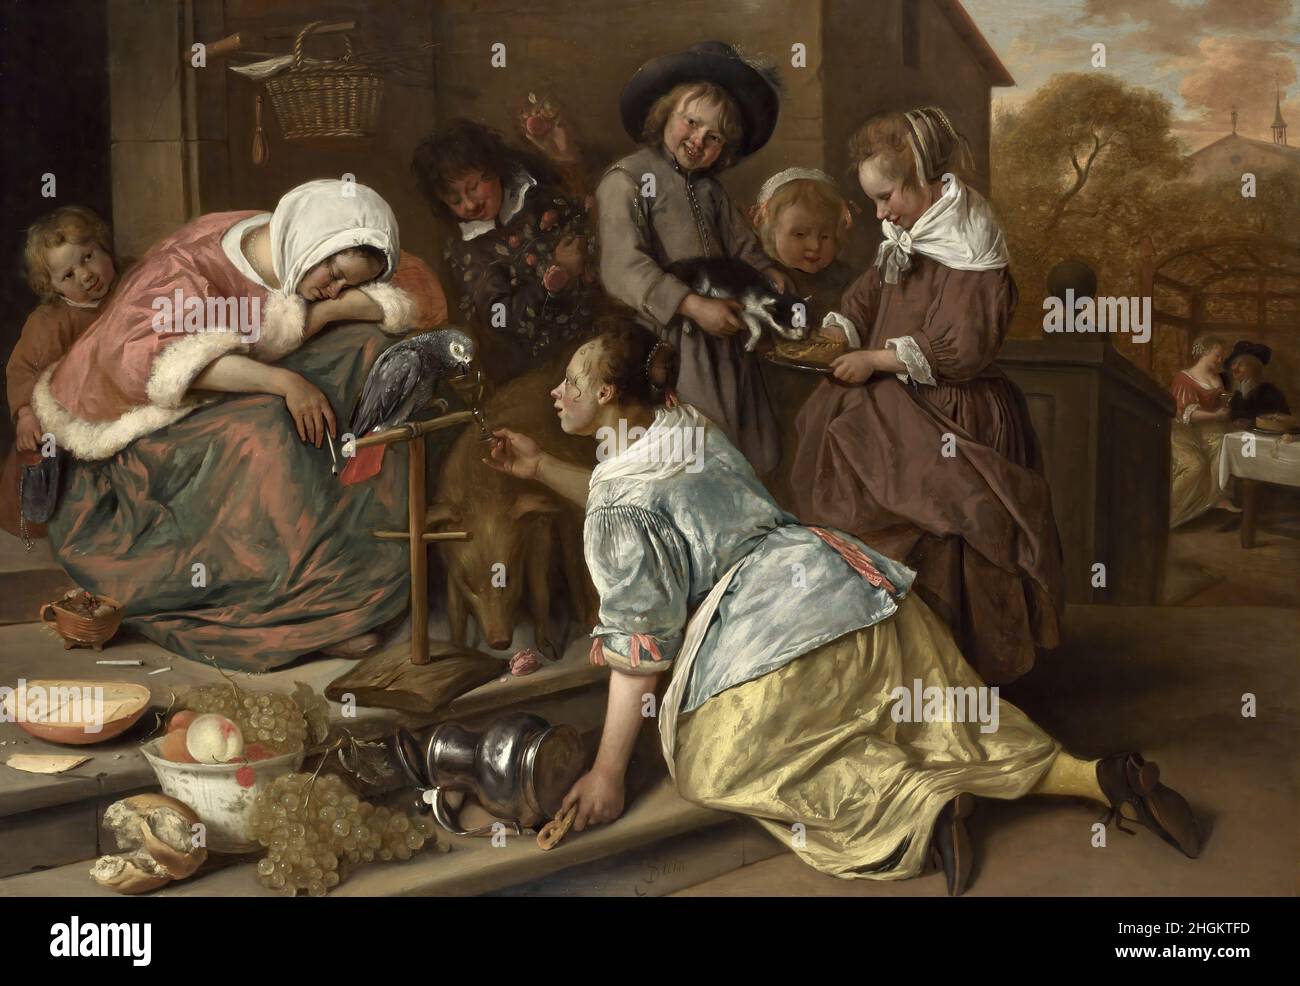 The Effects of Intemperance - 1663 65 - oil on wood 76 x 106,5 cm - Steen Jan Stock Photo